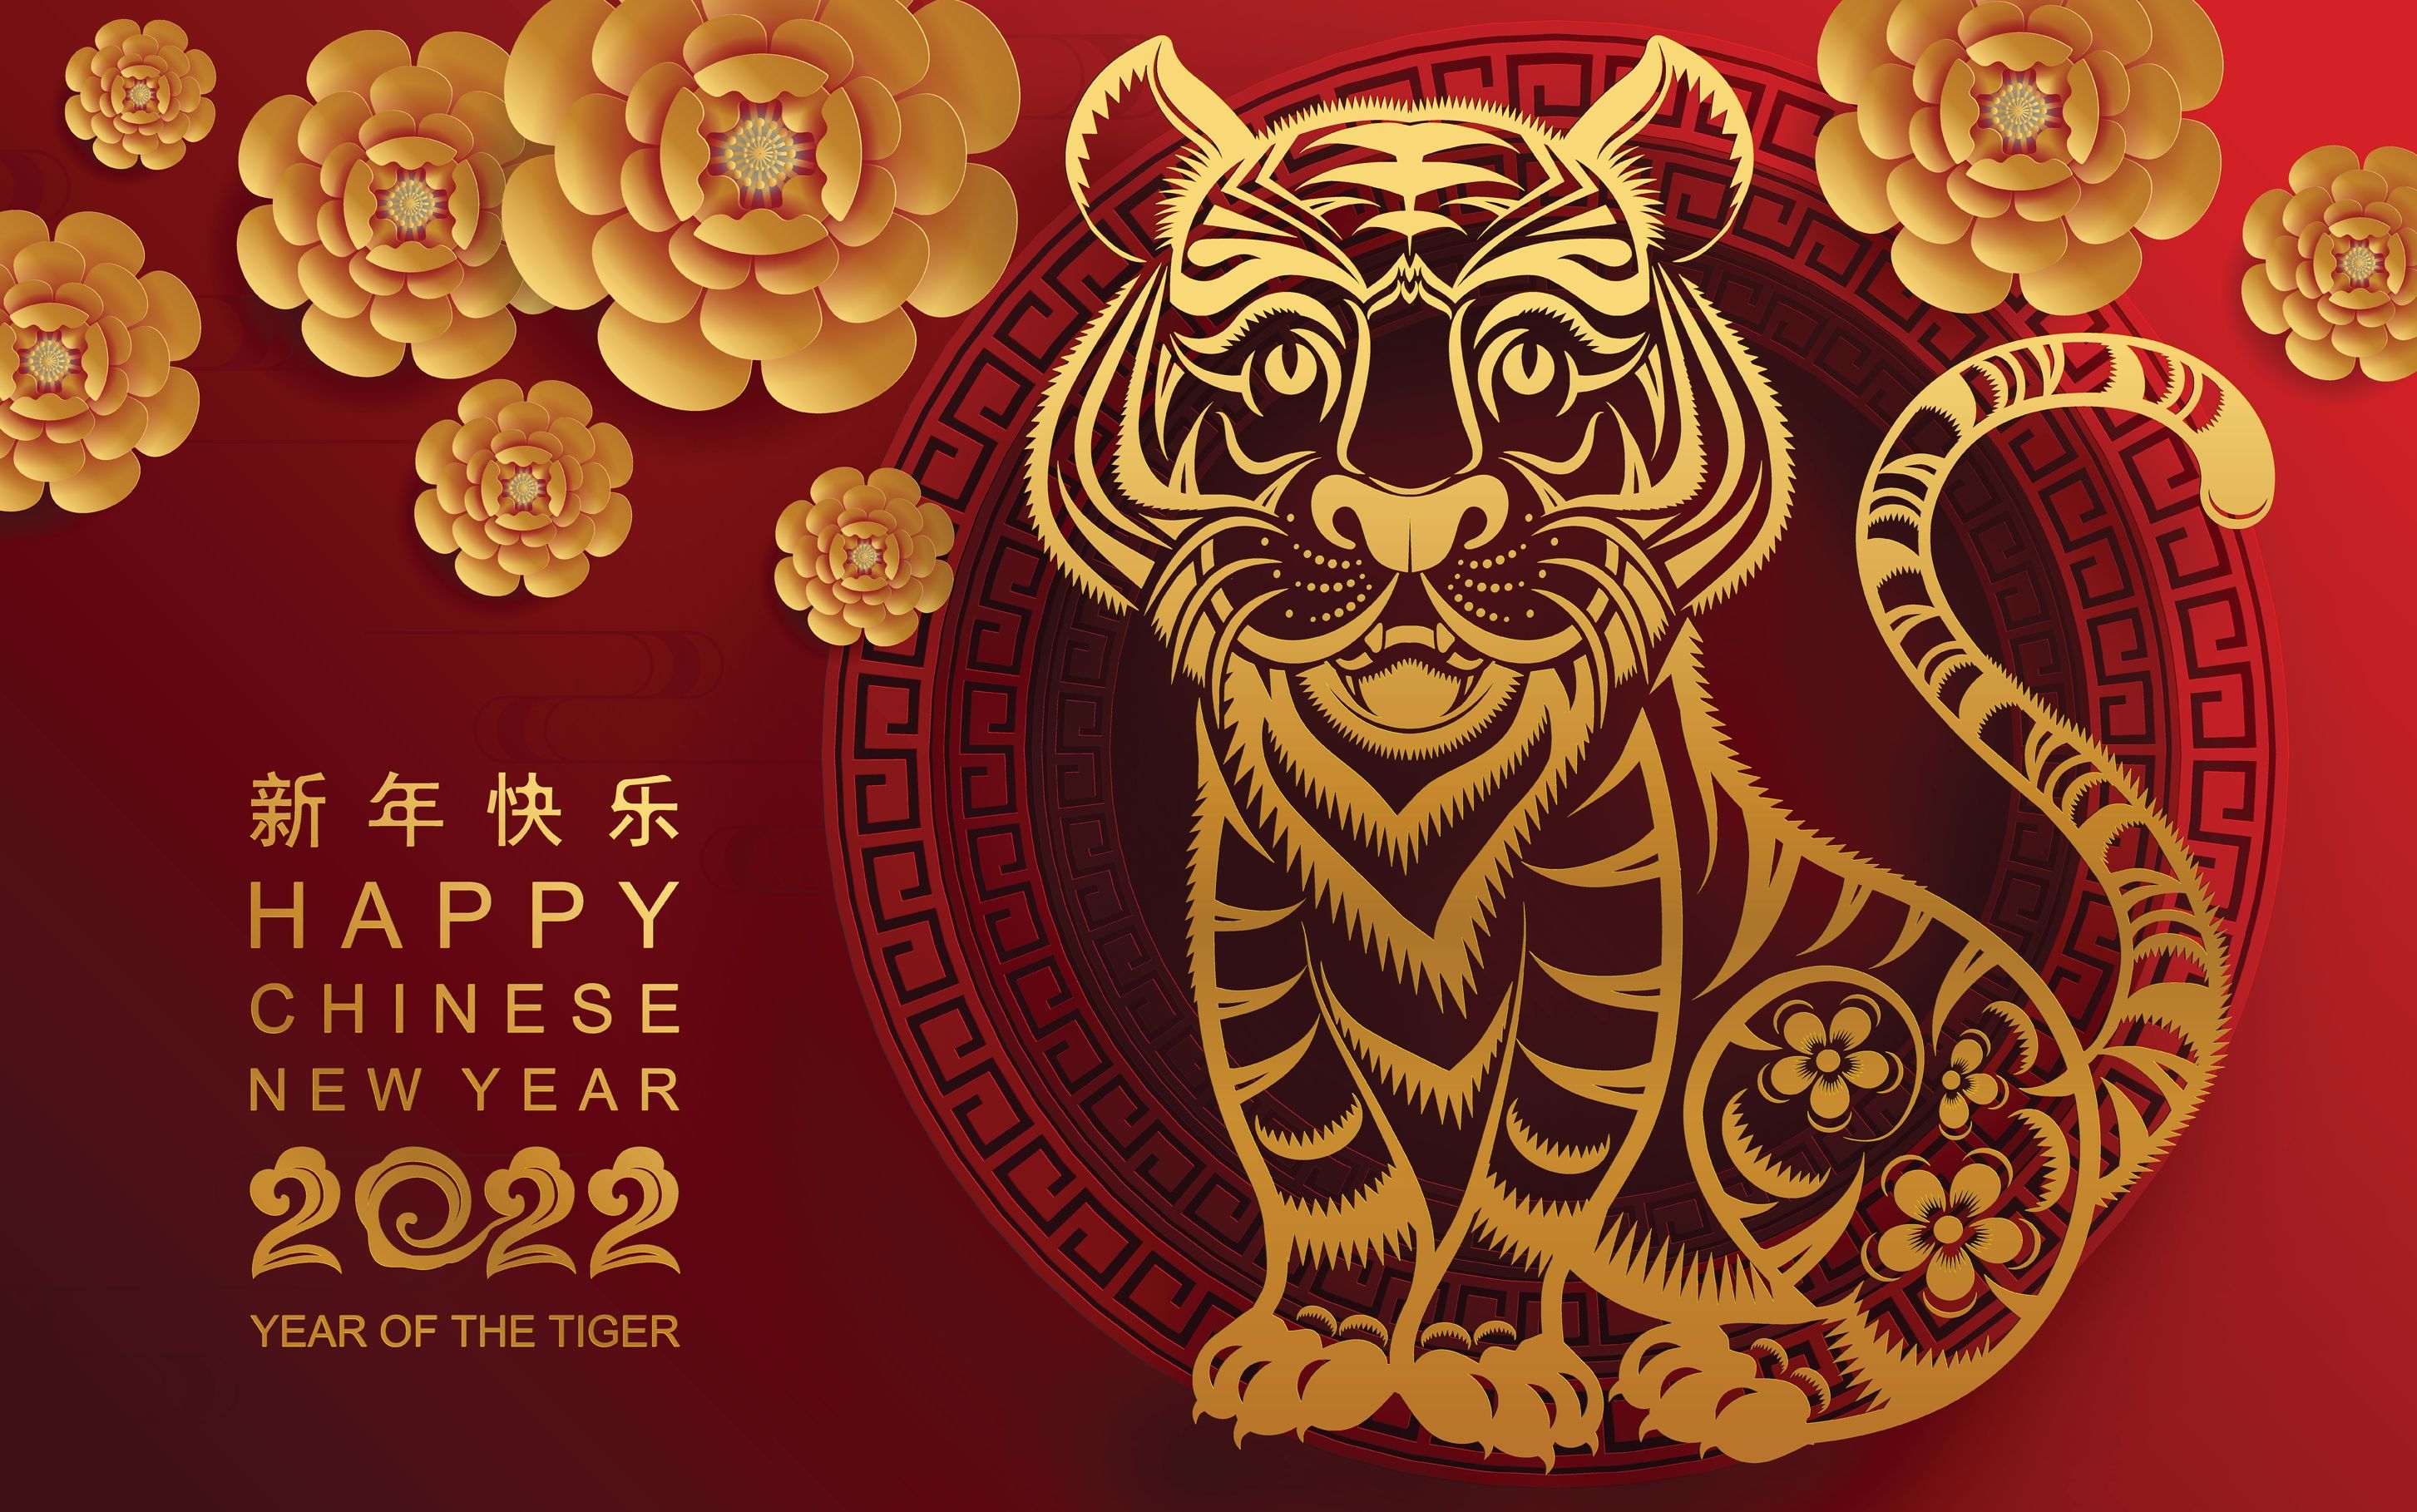 Wish Your Employees Wealth, Health and Happiness in the Lunar New Year